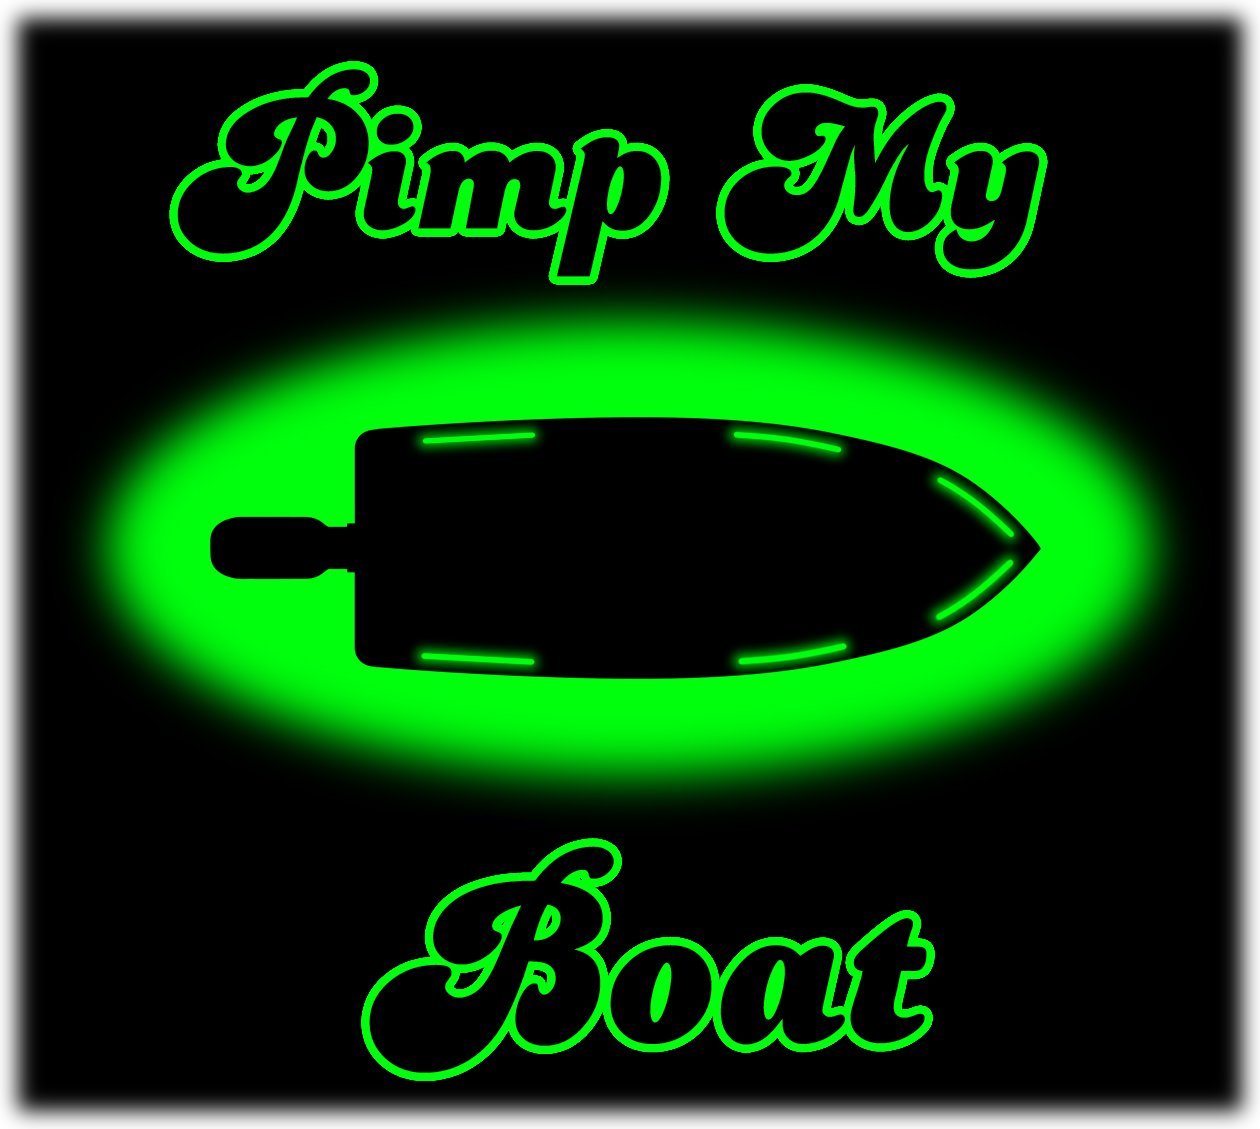 Pimp My Boat (Green) LED Boat Deck Lighting Kit DIY with Red & Green Navigation Lights Pimp my Boat Green Blob Outdoors 